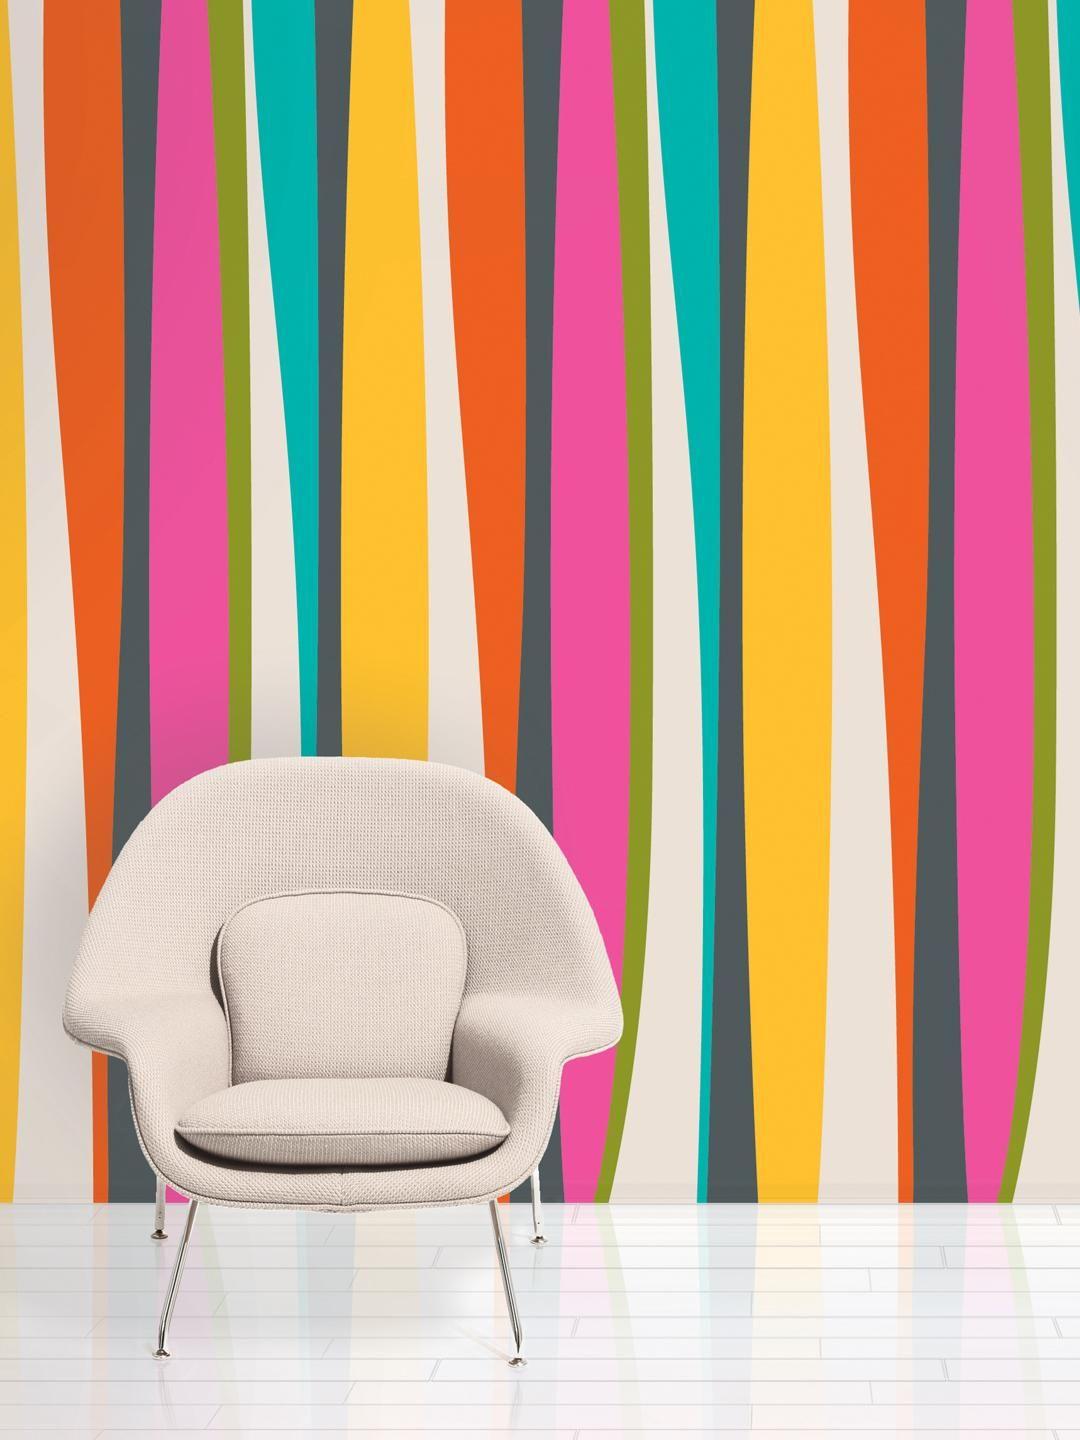 1080 x 1440 · jpeg - Jazz up a bland wall with some fun removable wallpaper. | Striped ...